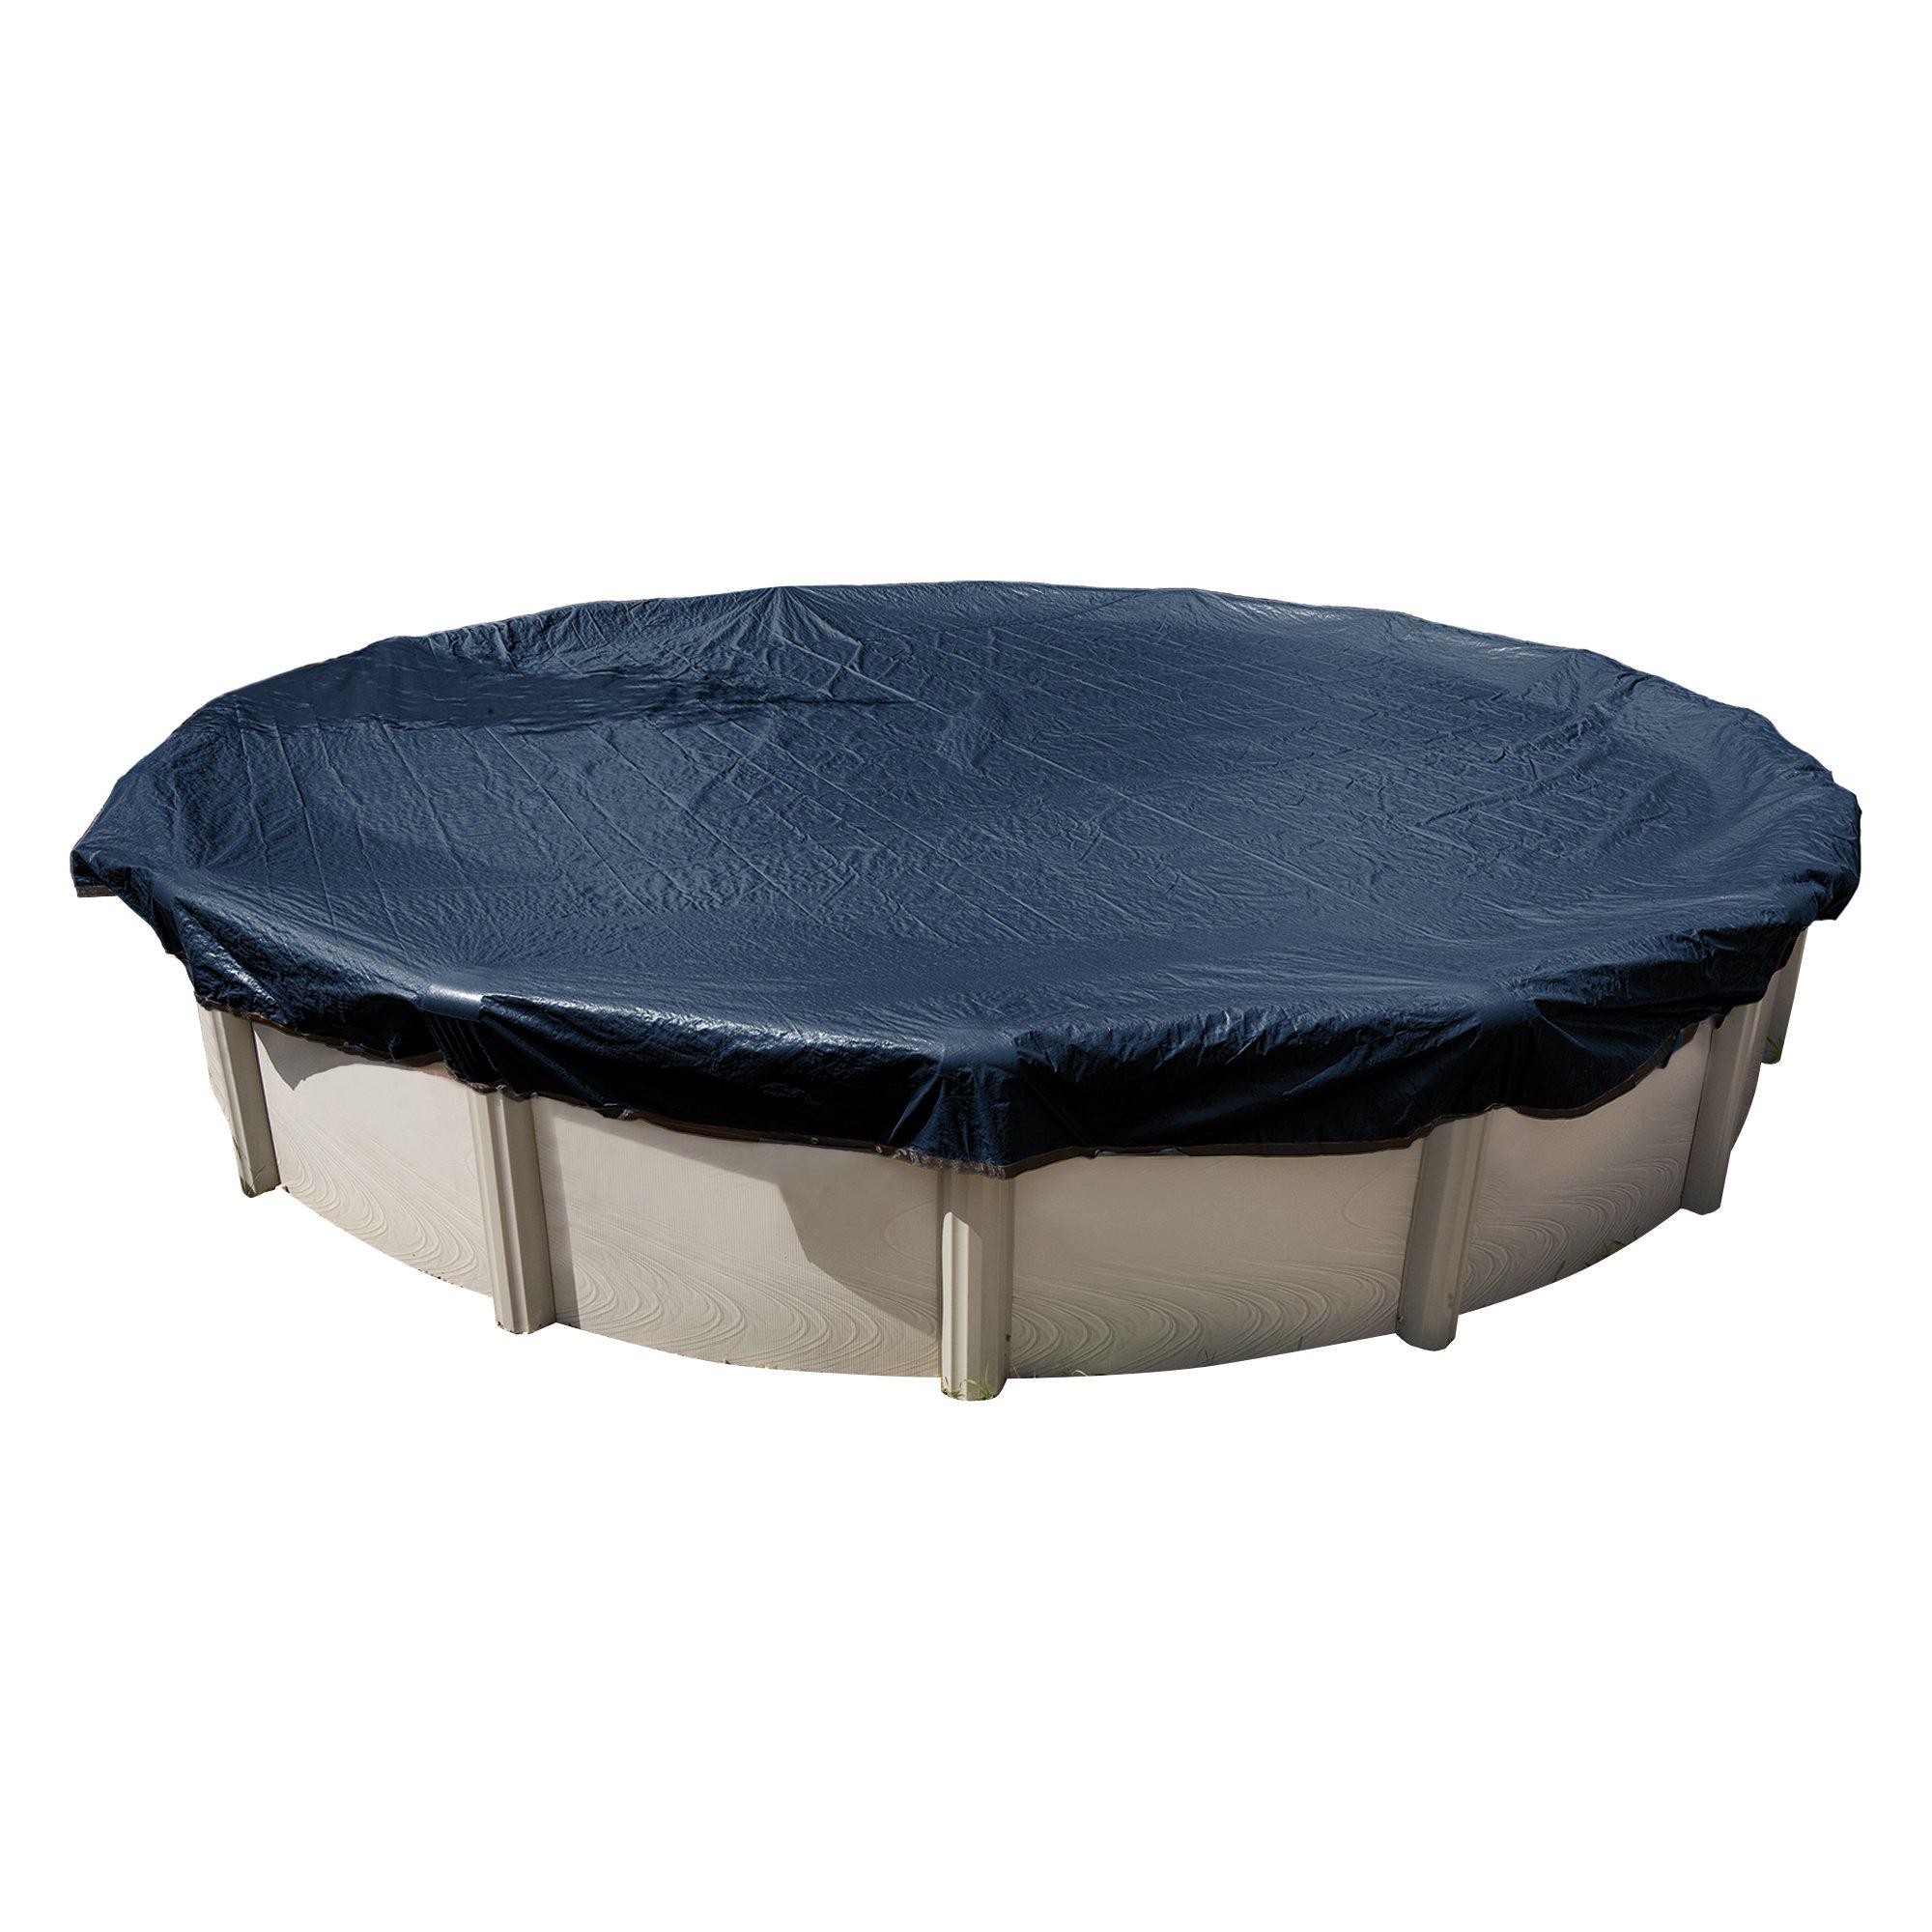 Midwest Canvas  28 Round Winter Pool Cover 8 Year Warranty Blue